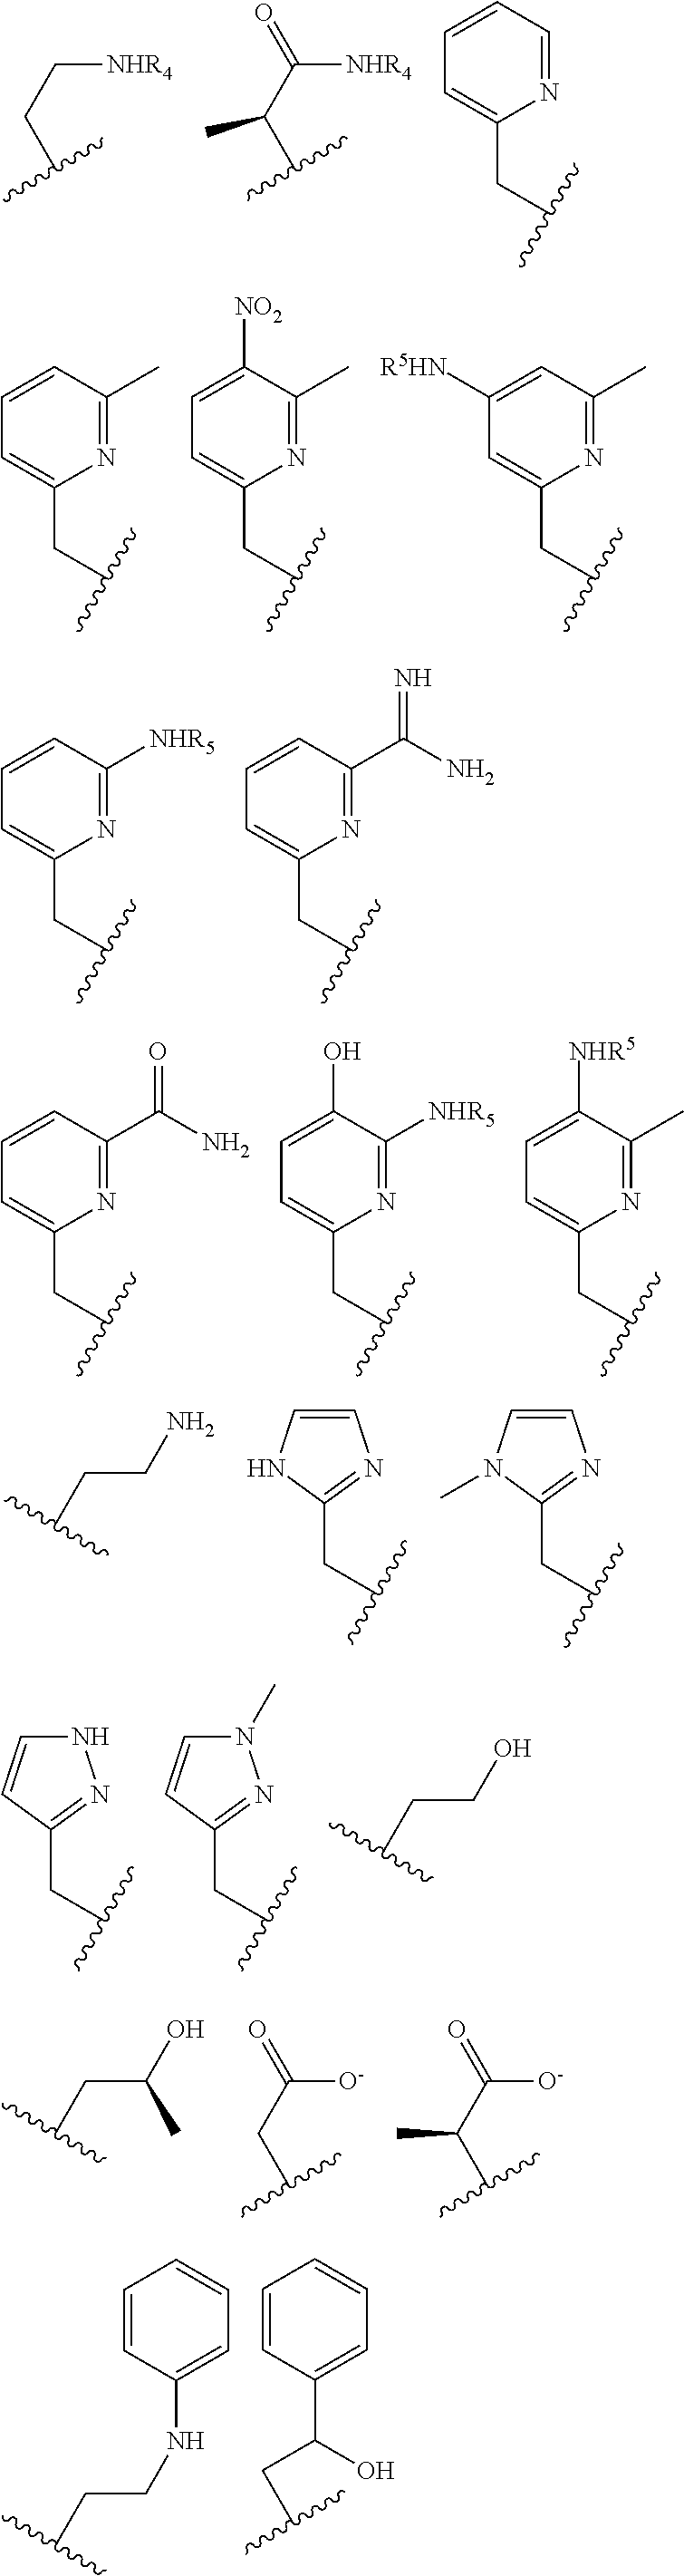 Macrocycles, cobalt and iron complexes of same, and methods of making and using same